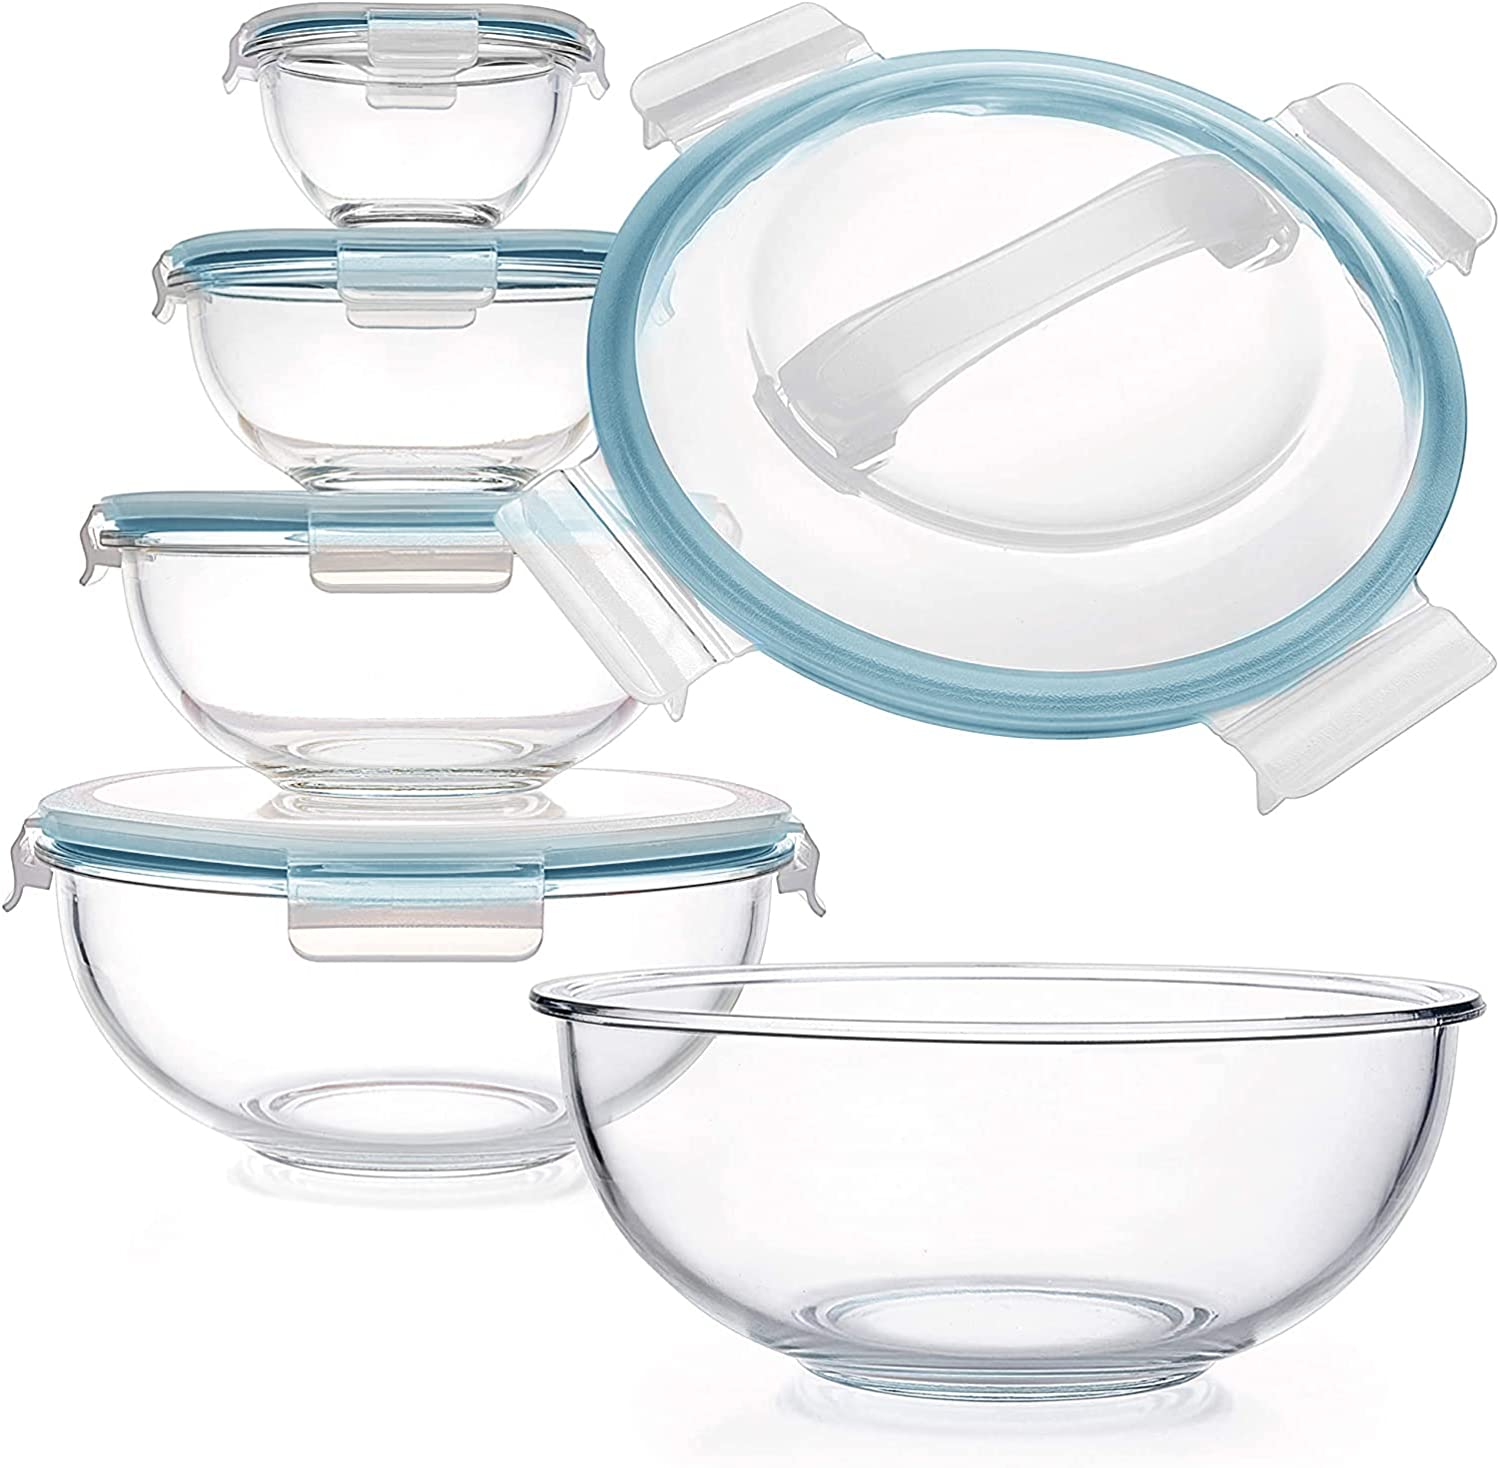 24 Plastic Mix ing Bowls with Handles, 2.5 qt. at Dollar Tree